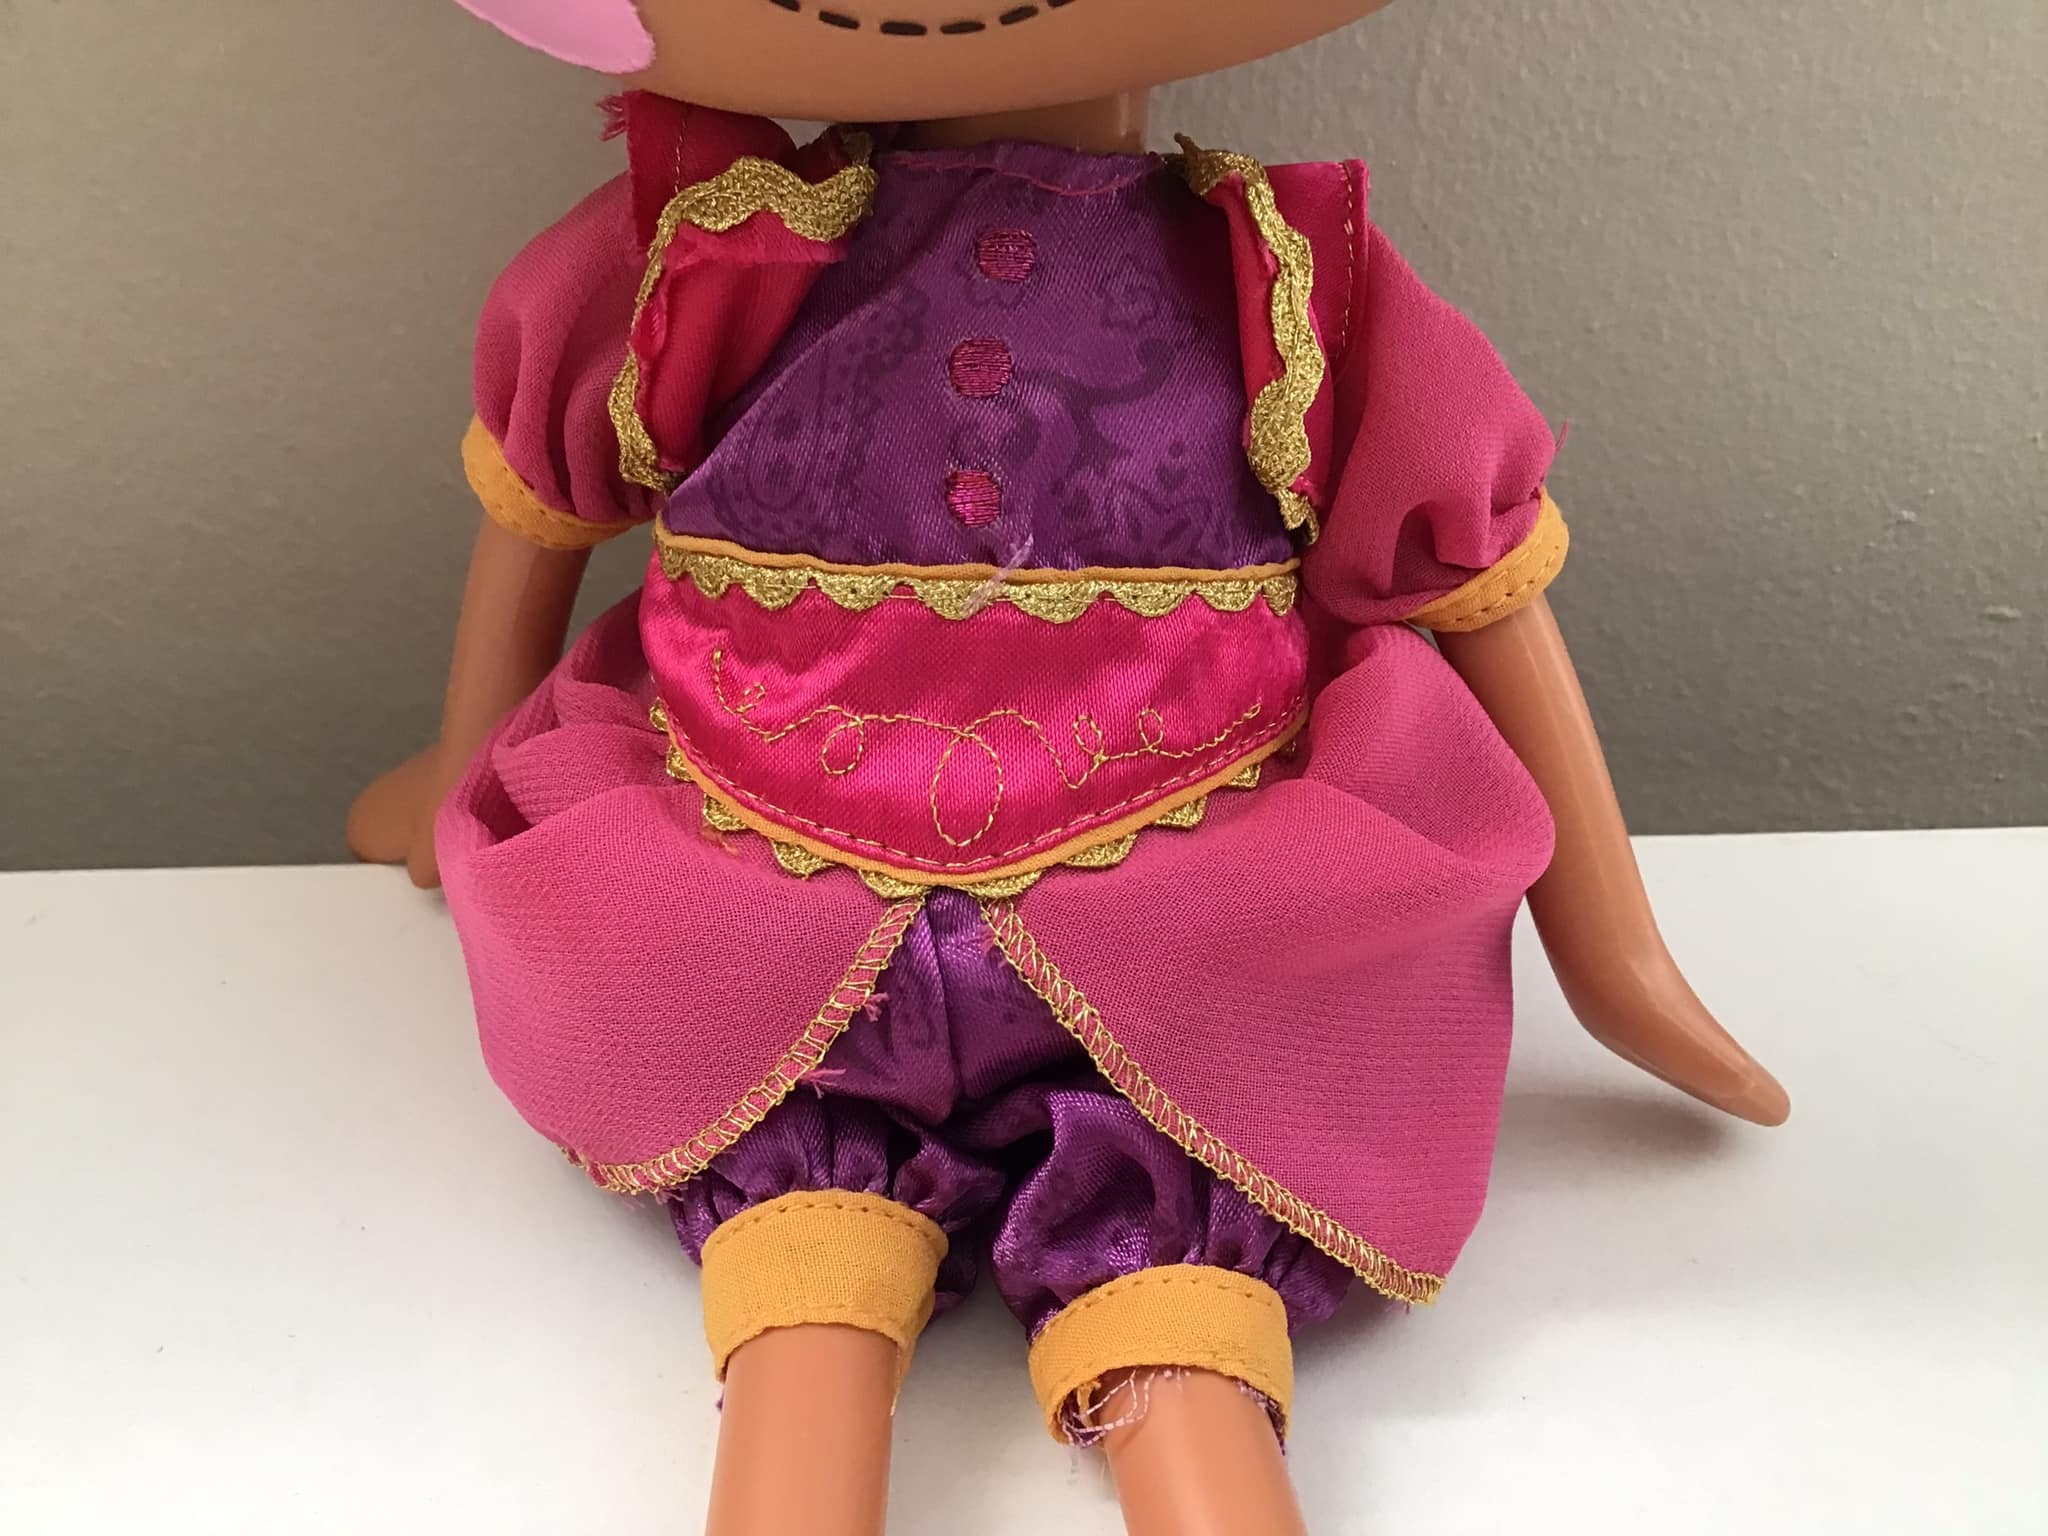 Red Apple Princess Doll – Loopy Finds